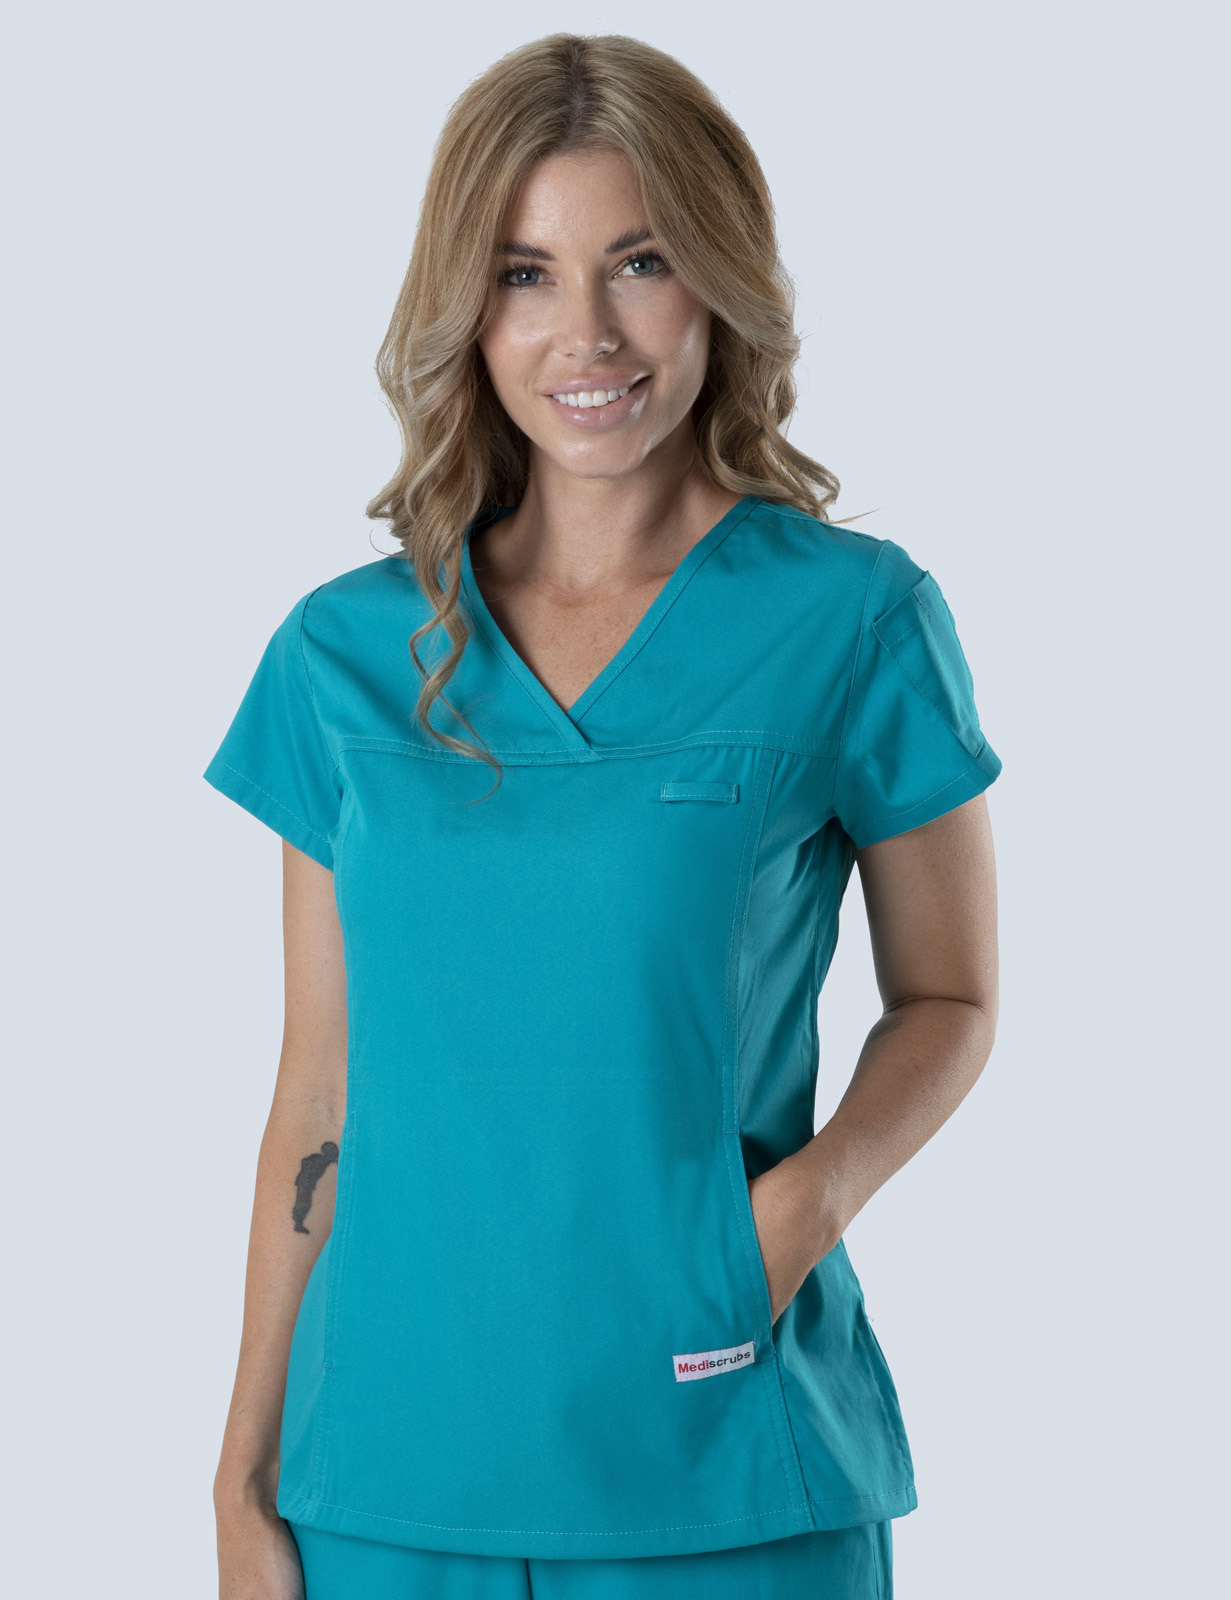 Robina Hospital - ED Nurse (Women's Fit Solid Scrub Top and Cargo Pants in Teal incl Logos)